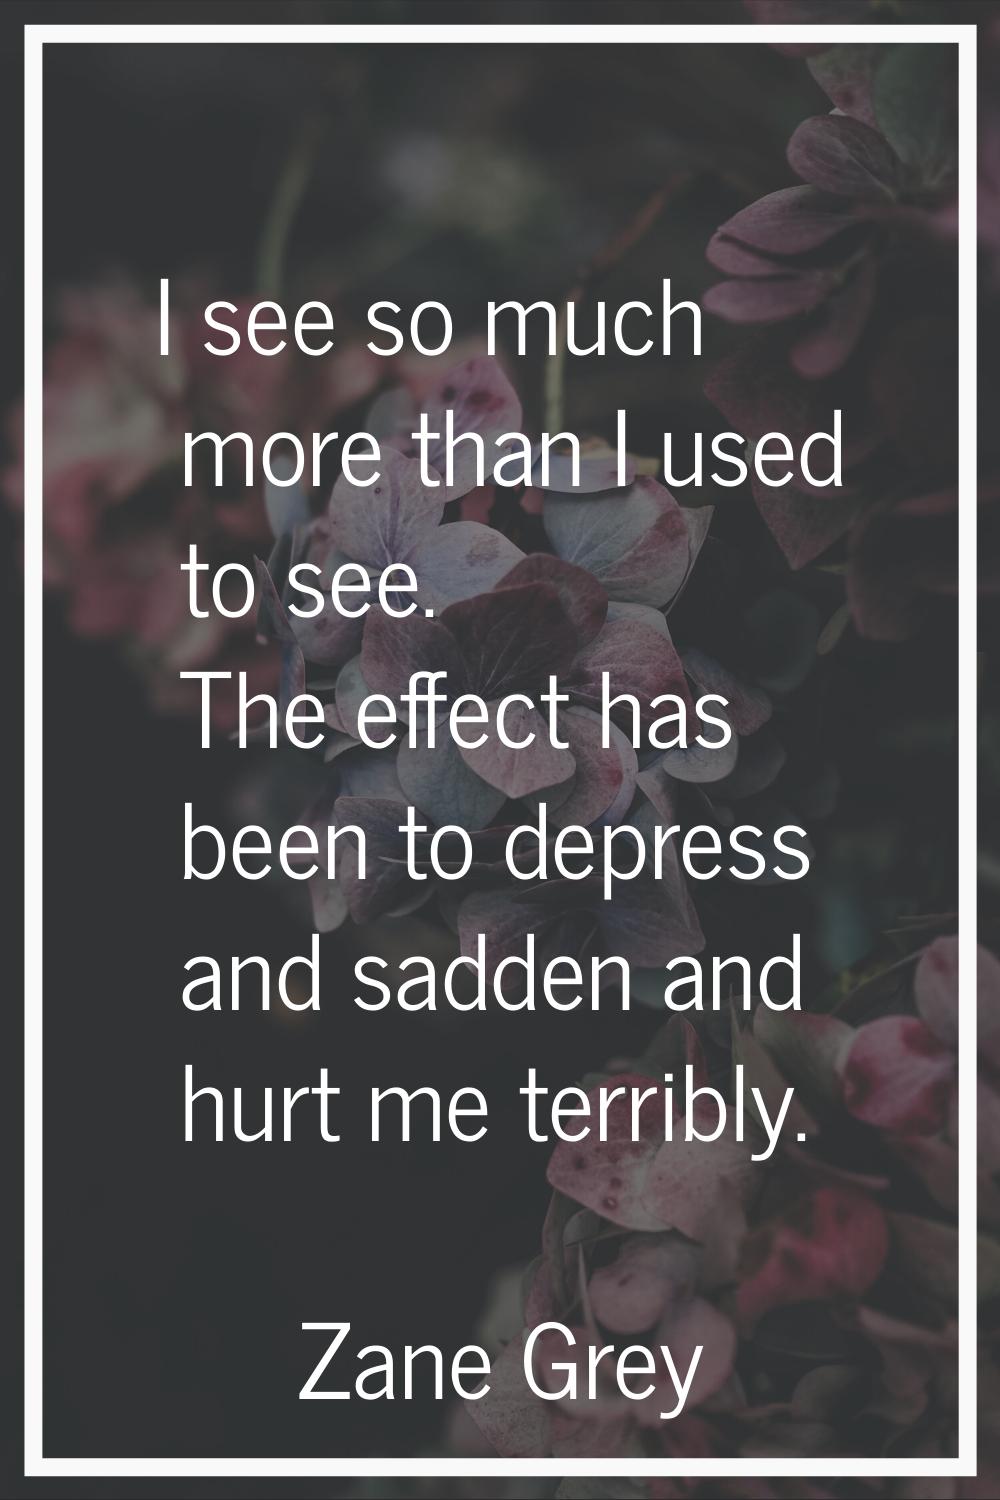 I see so much more than I used to see. The effect has been to depress and sadden and hurt me terrib